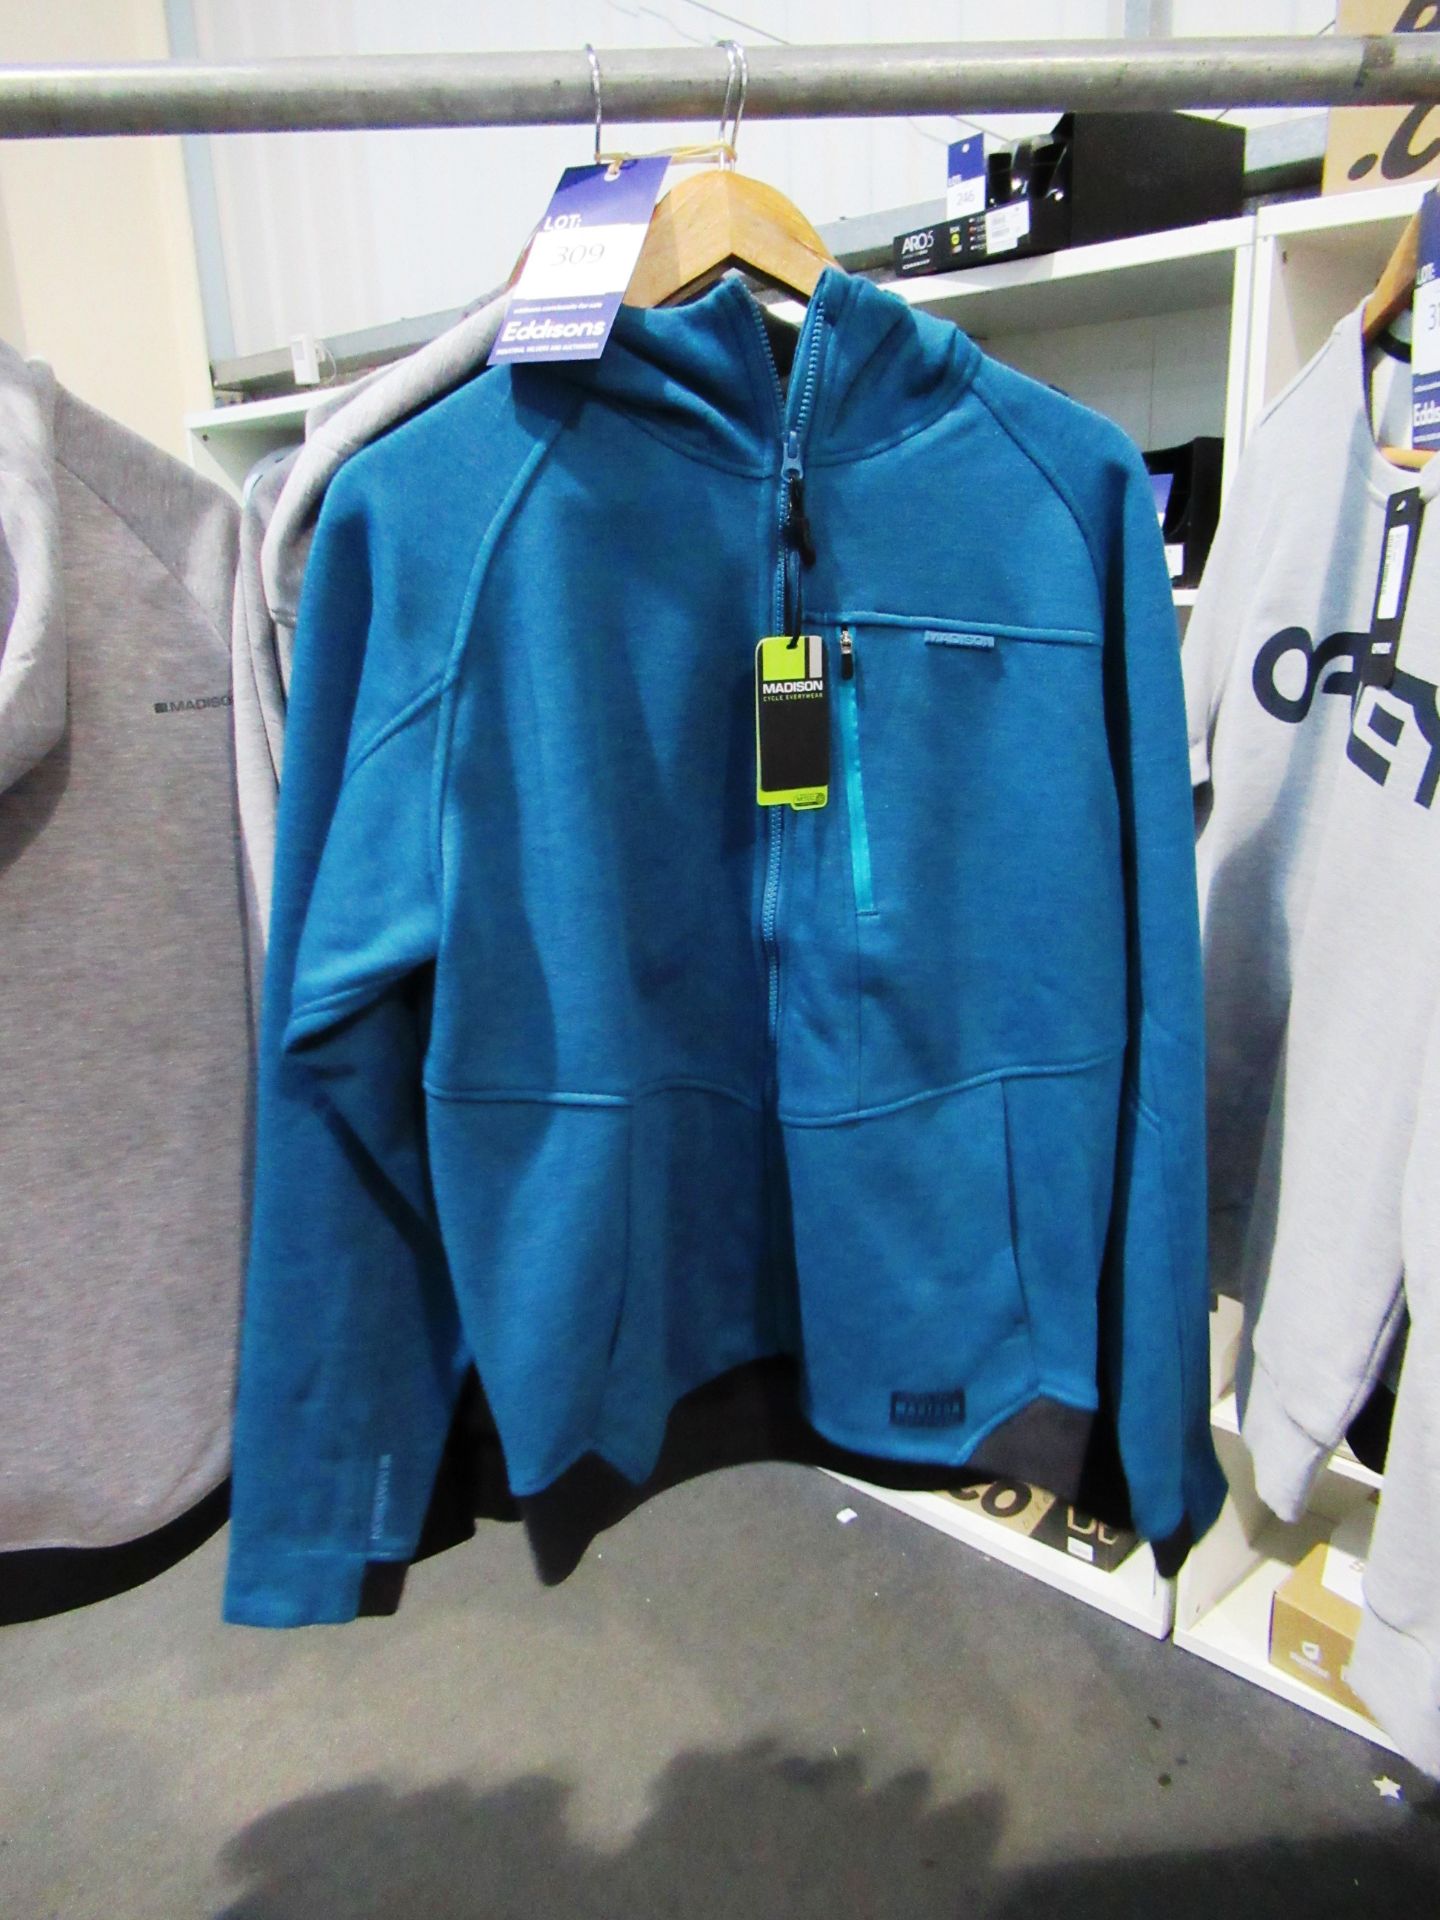 2 x Madison Roam Softshell Jackets (M) in blue and in grey complete with 1 x Oakley Blackout FZ Hood - Image 2 of 3